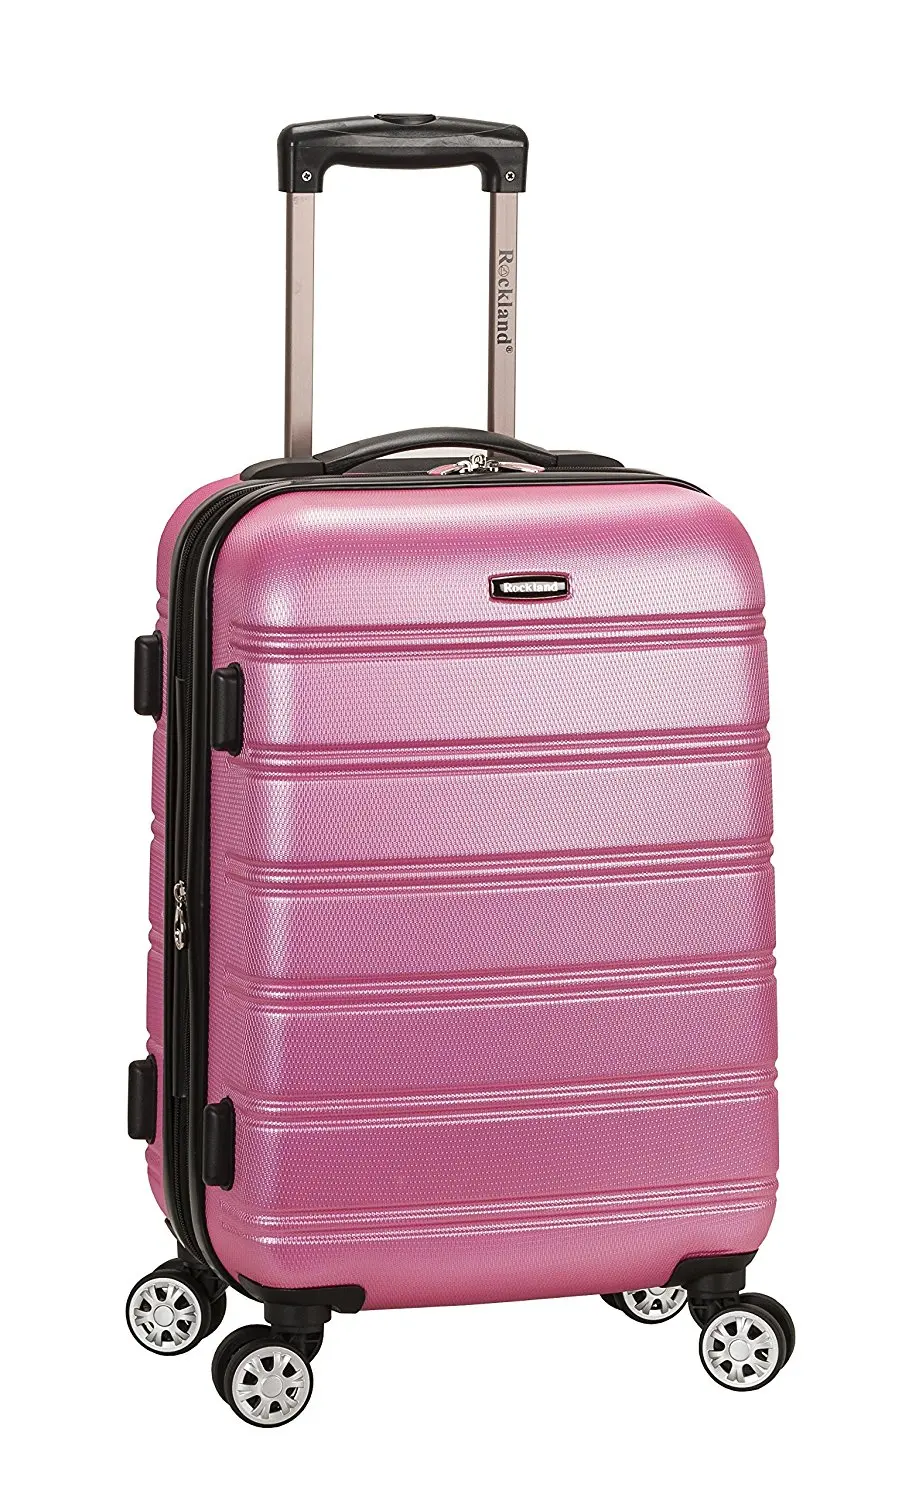 Cheap Carry On Luggage Size, find Carry On Luggage Size deals on line at 0